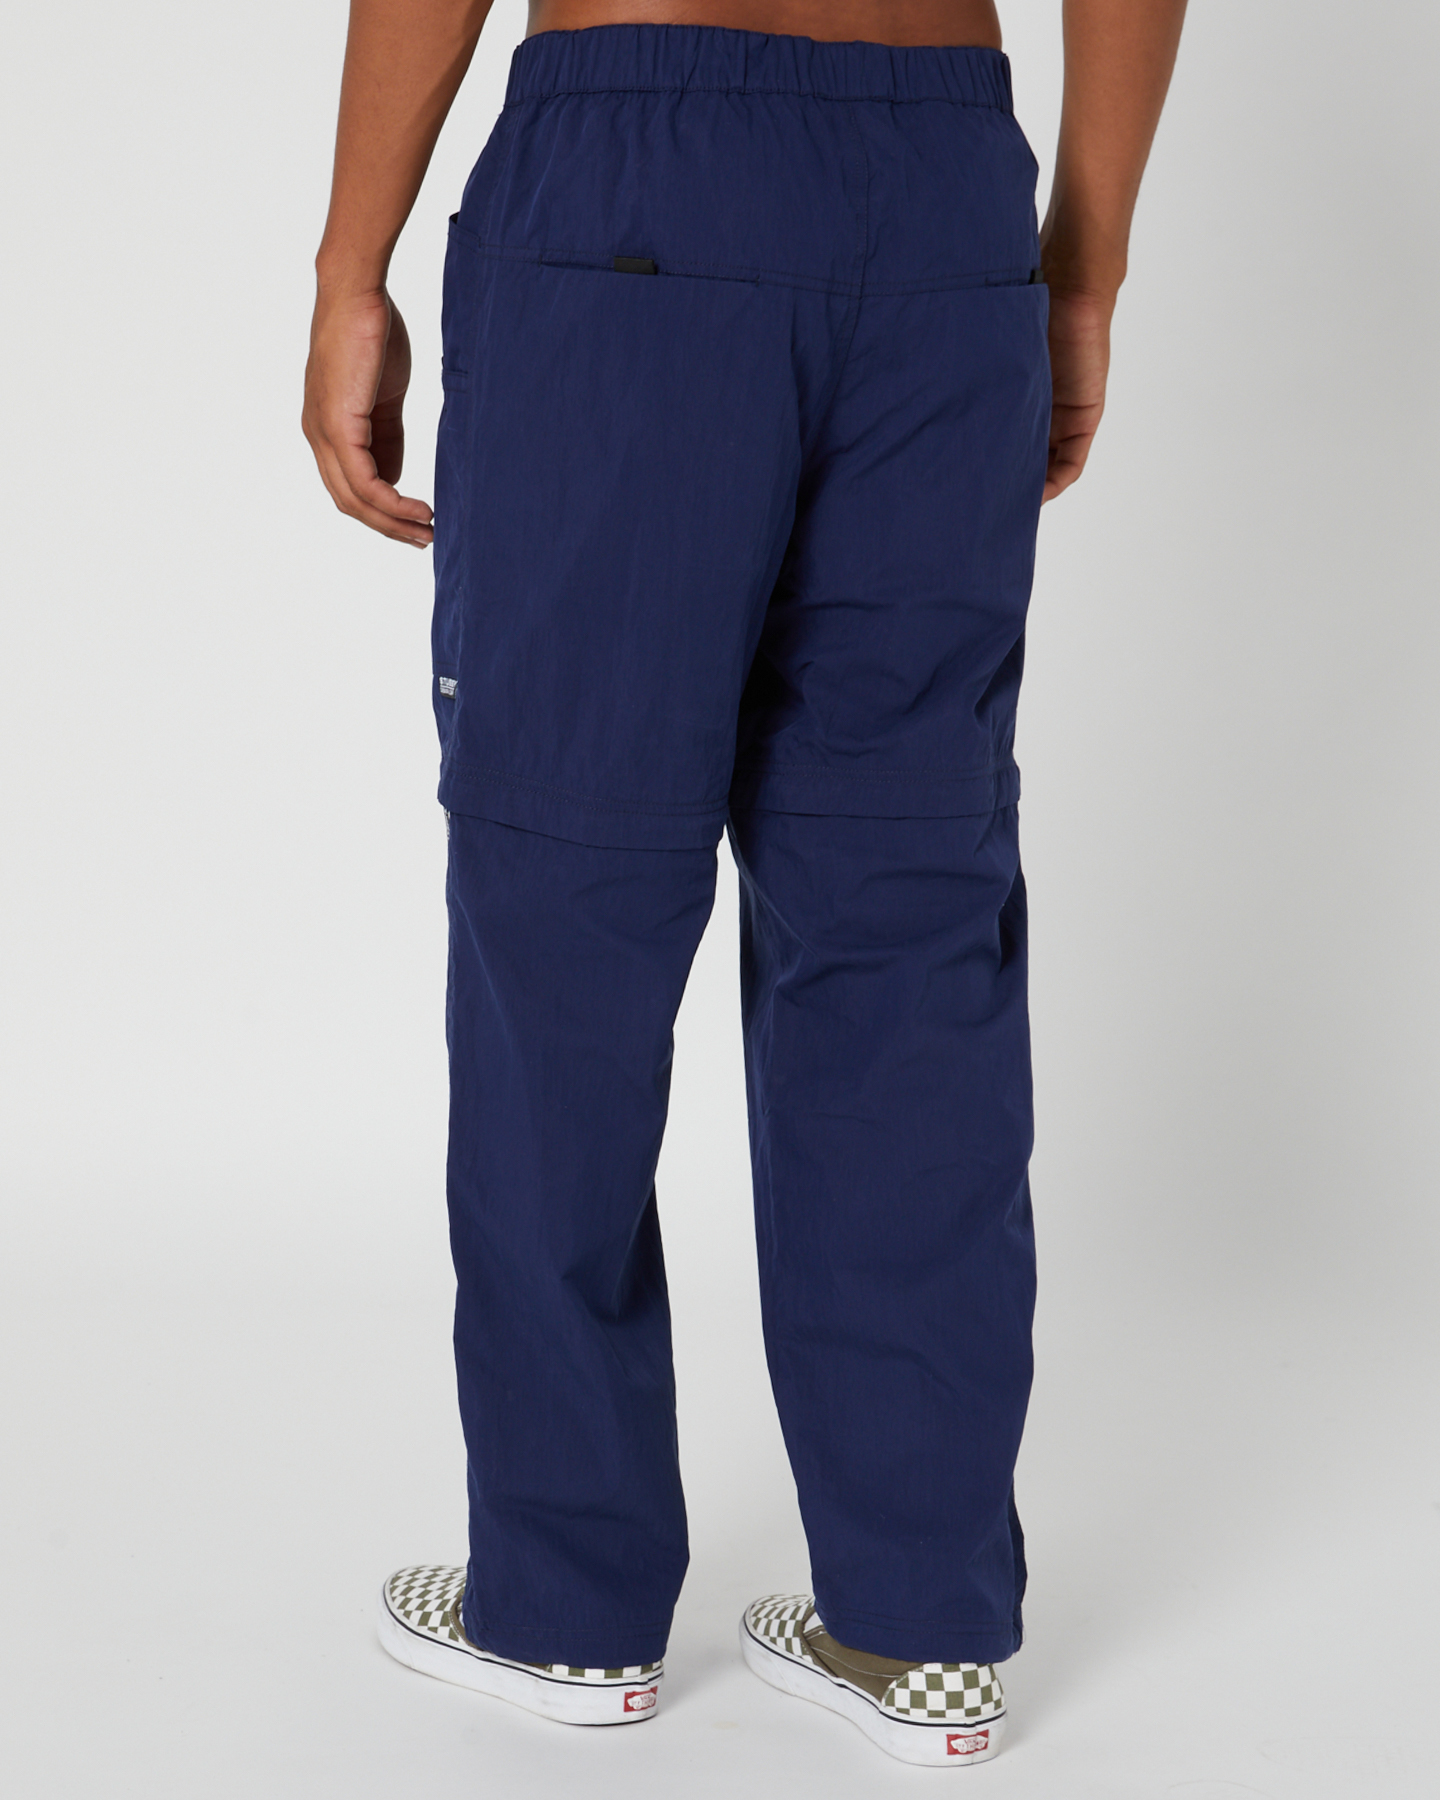 Stussy Nyco Convertible Pant - Navy | SurfStitch